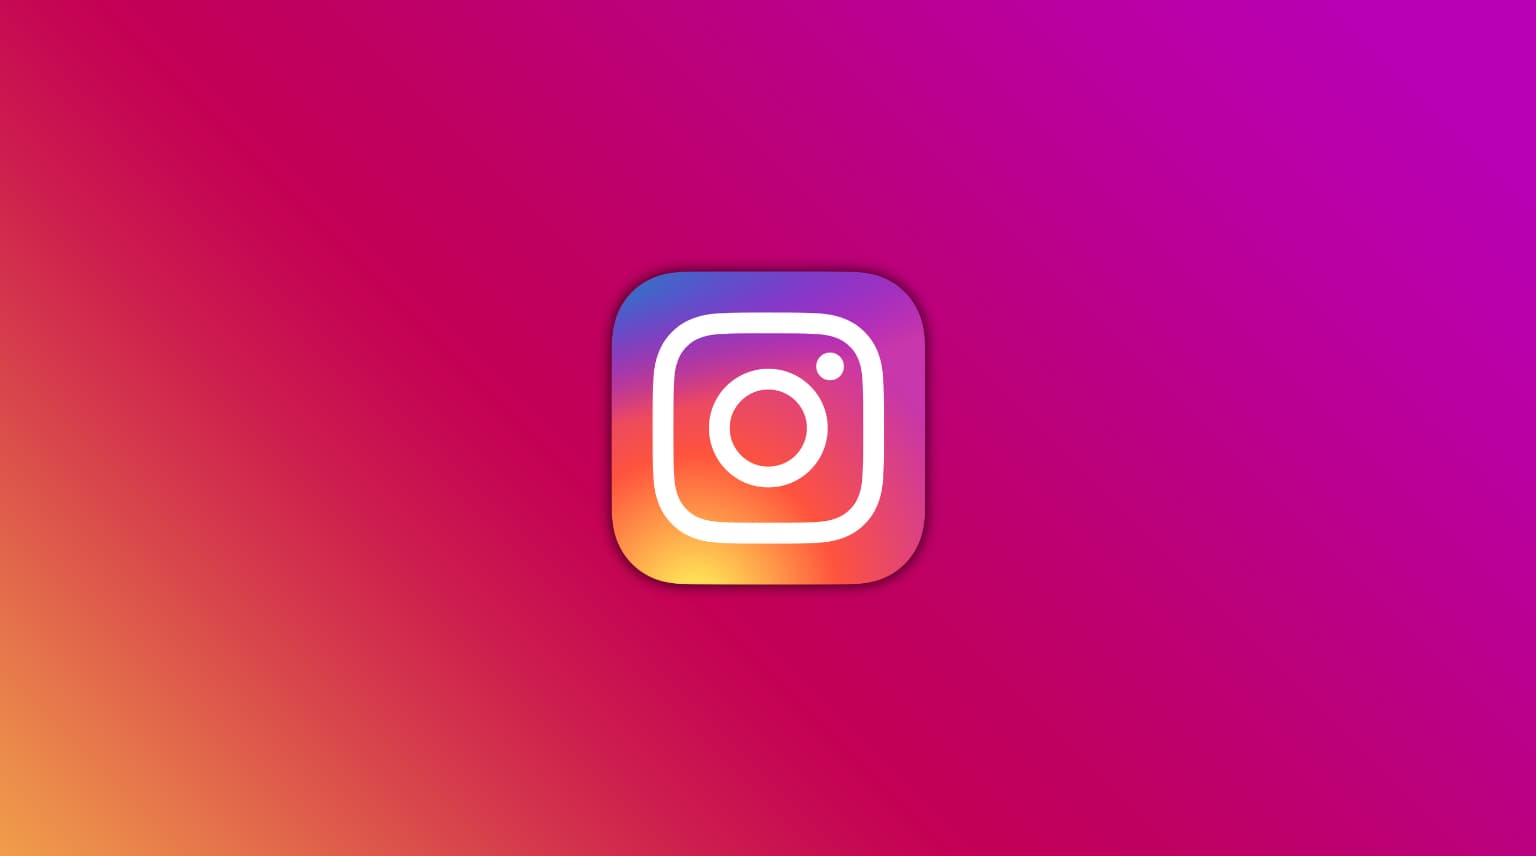 How to upload photo to Instagram without compression